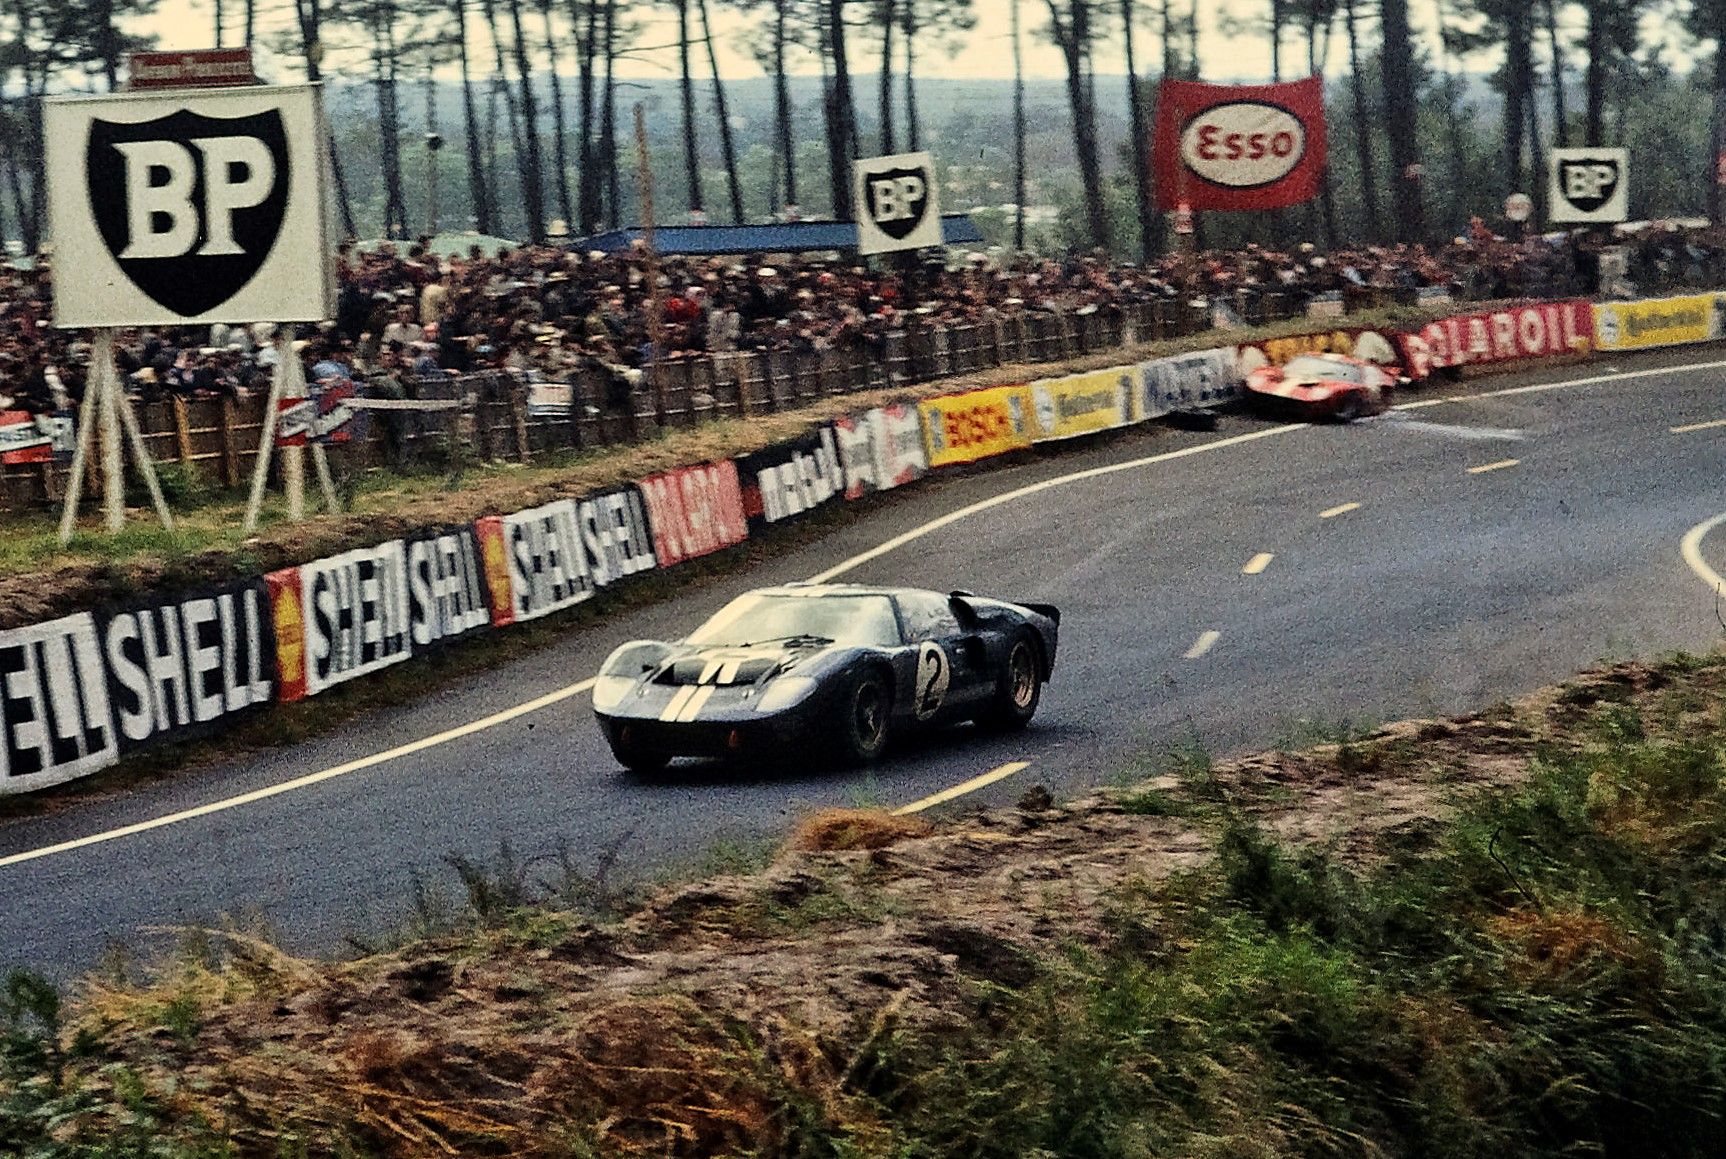 A Ford GT races away in the 1966 Le Mans